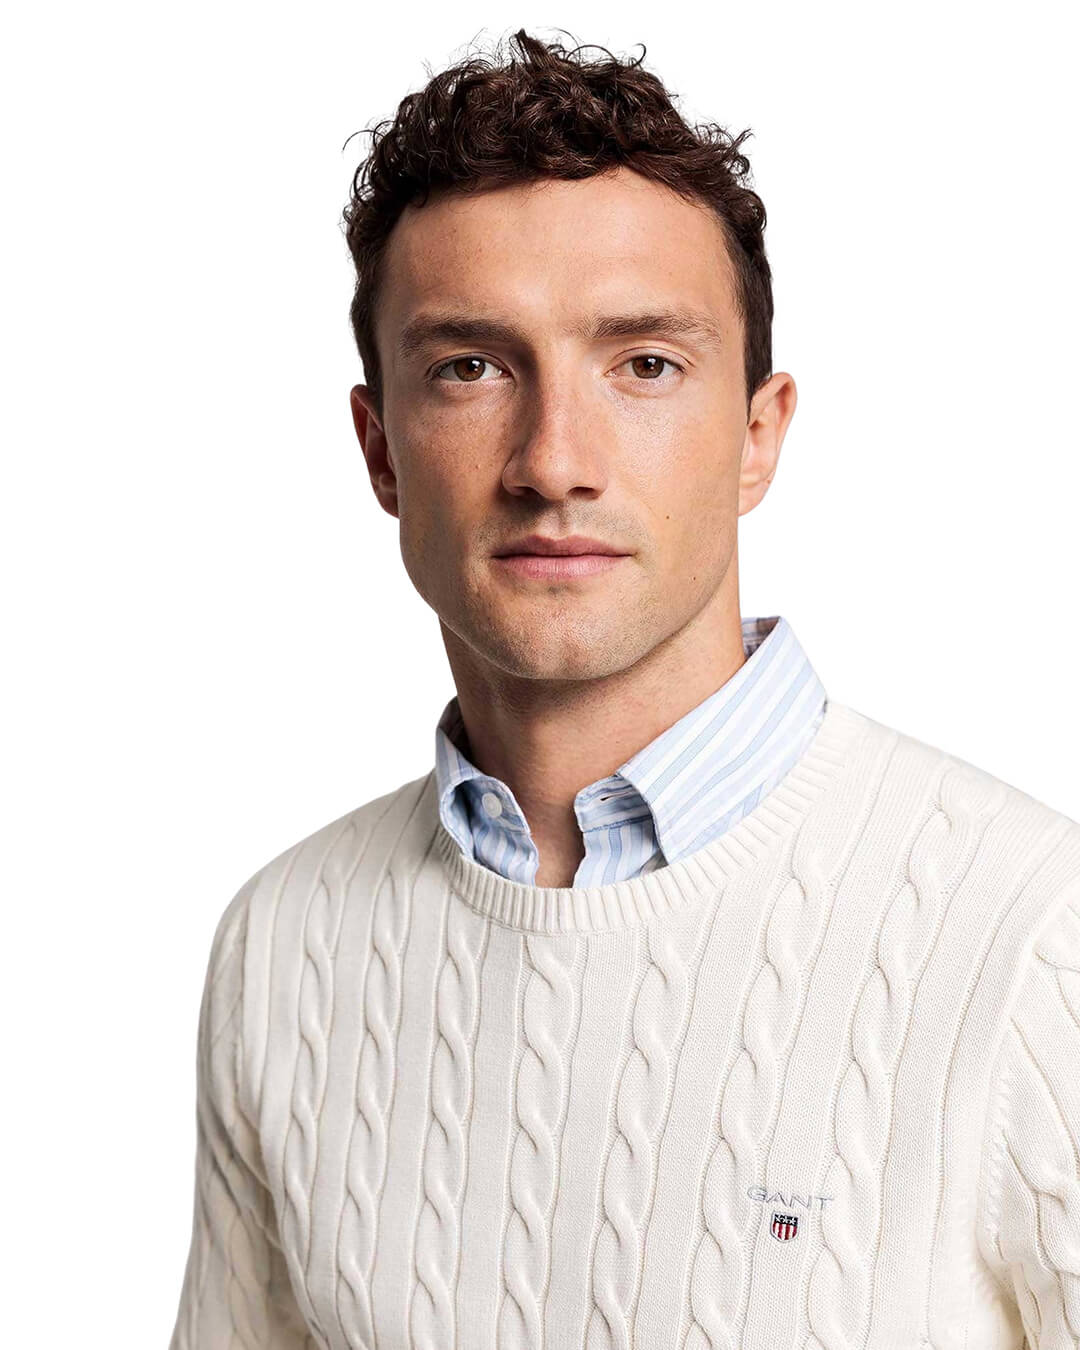 Gant Jumpers Gant Cream Cable Knit Sweater